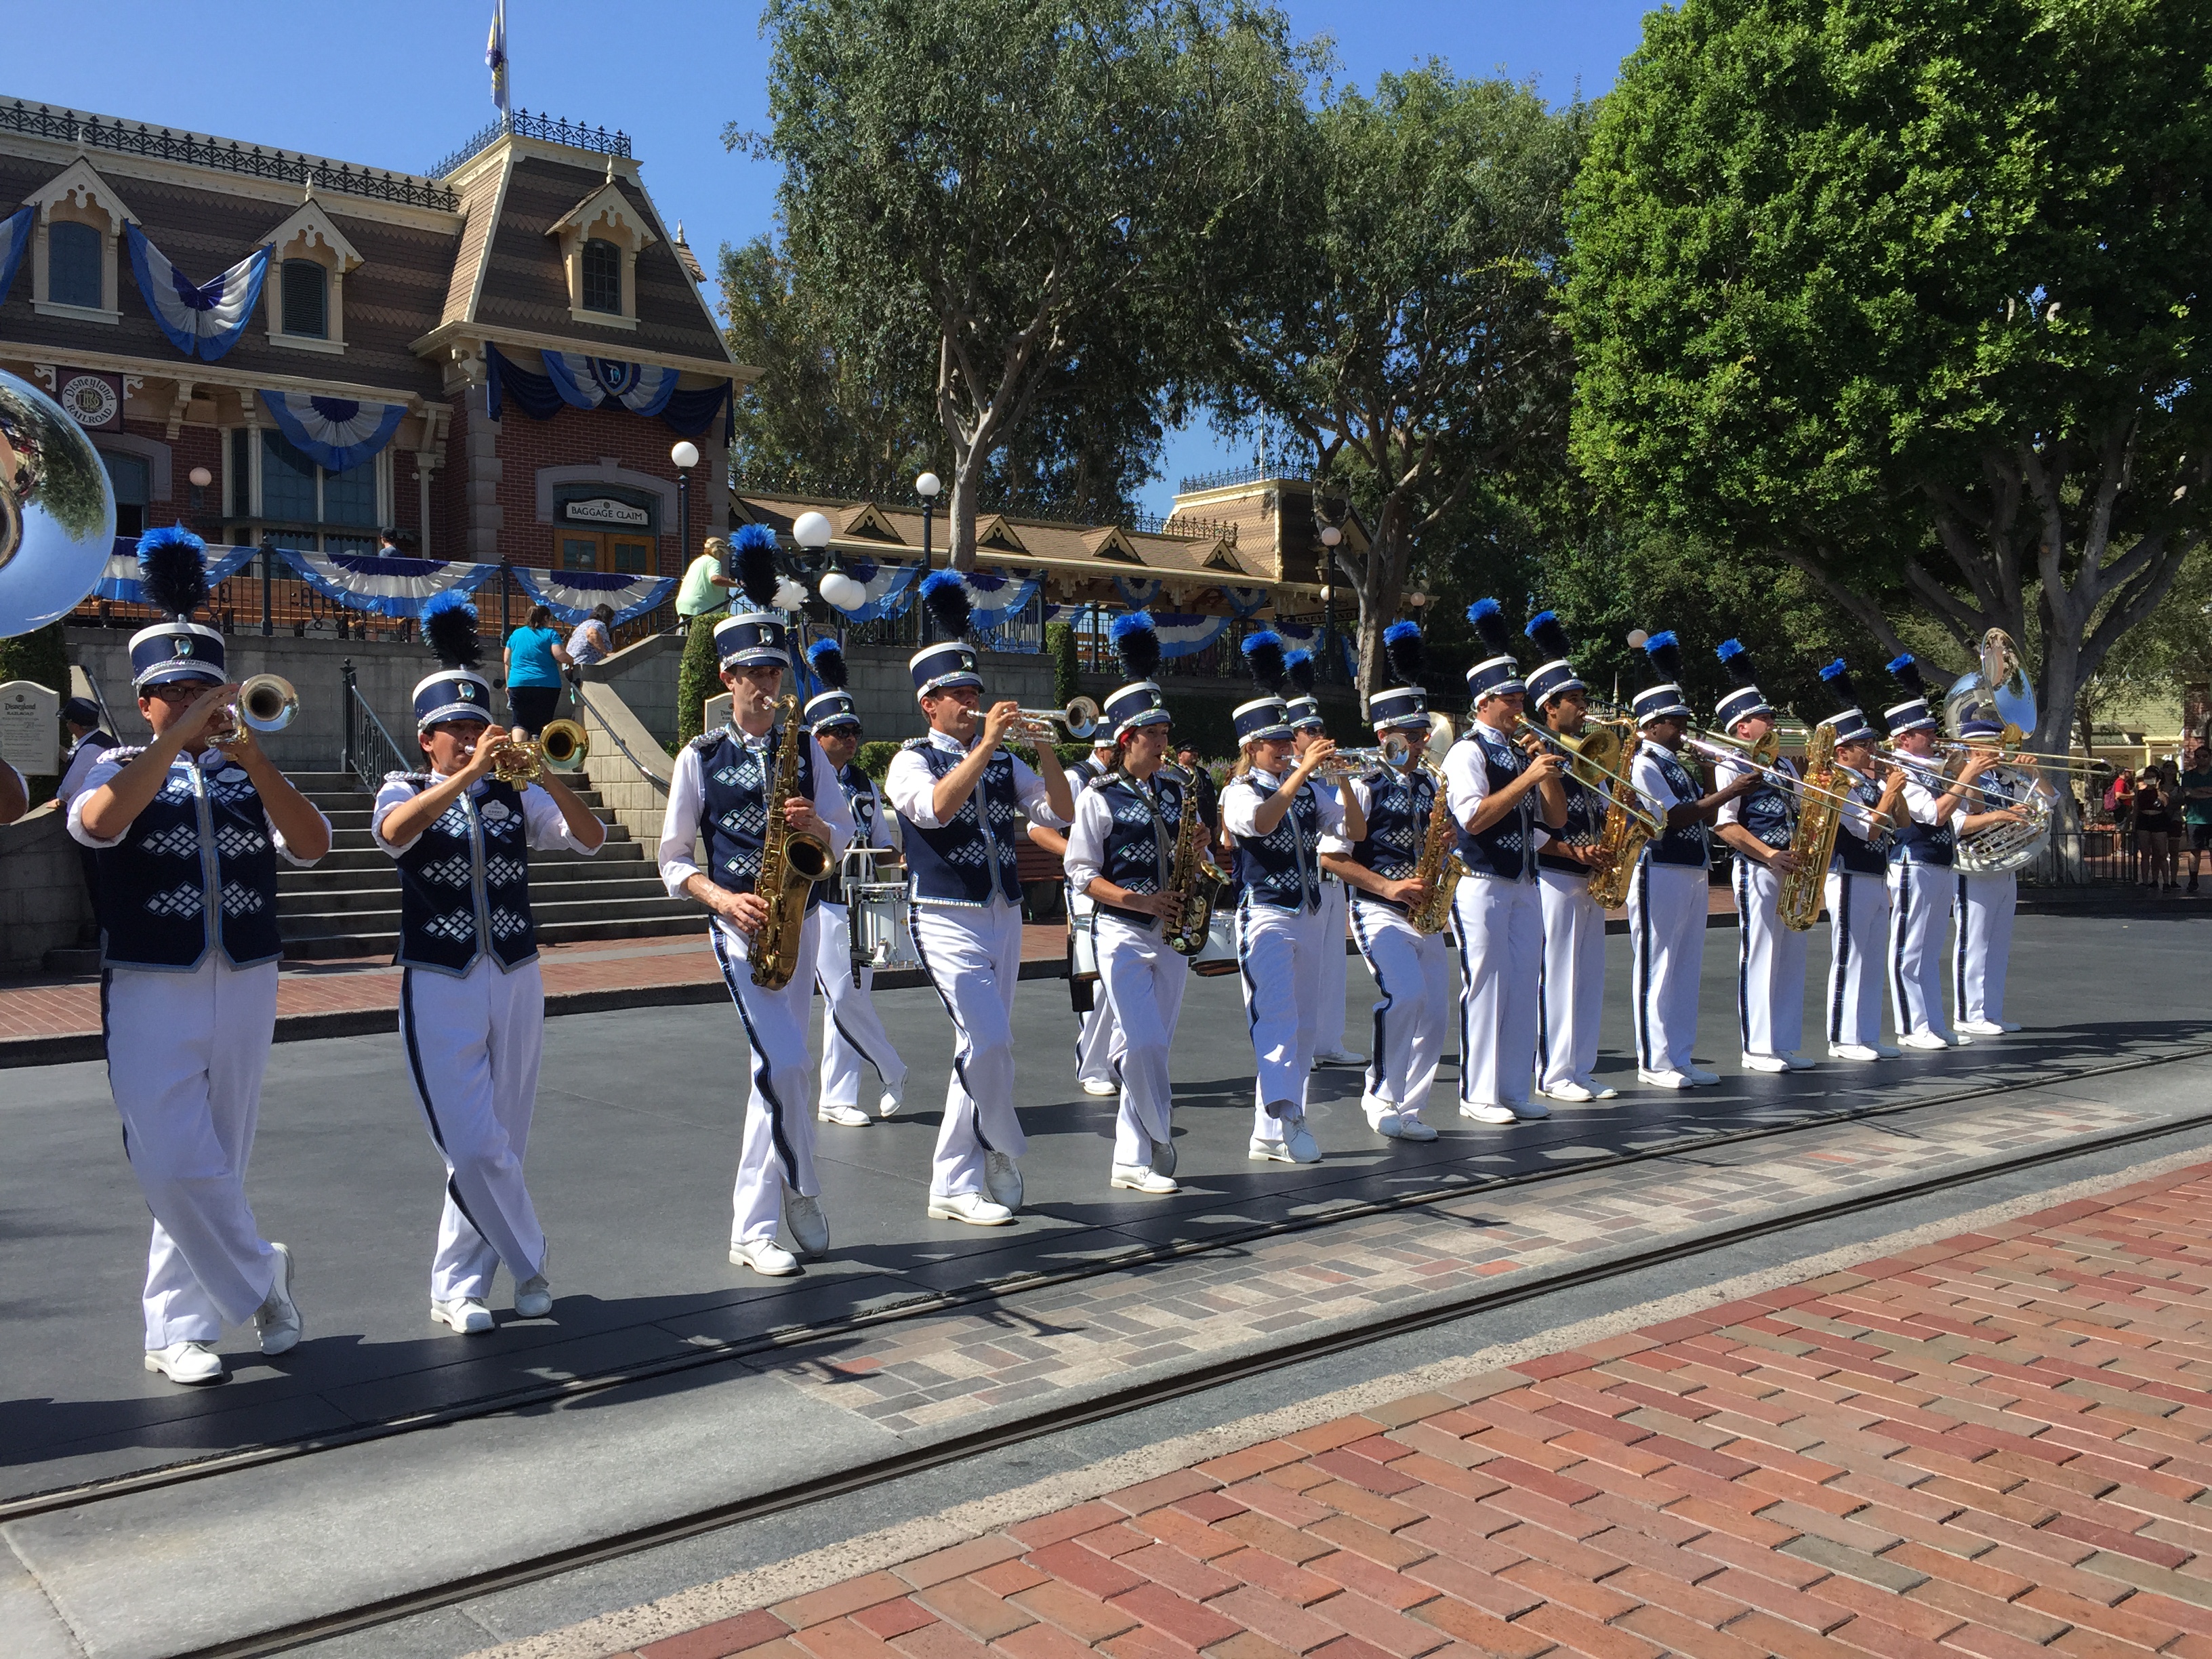 New Disneyland Band Debuts for the 60th Anniversary Celebration